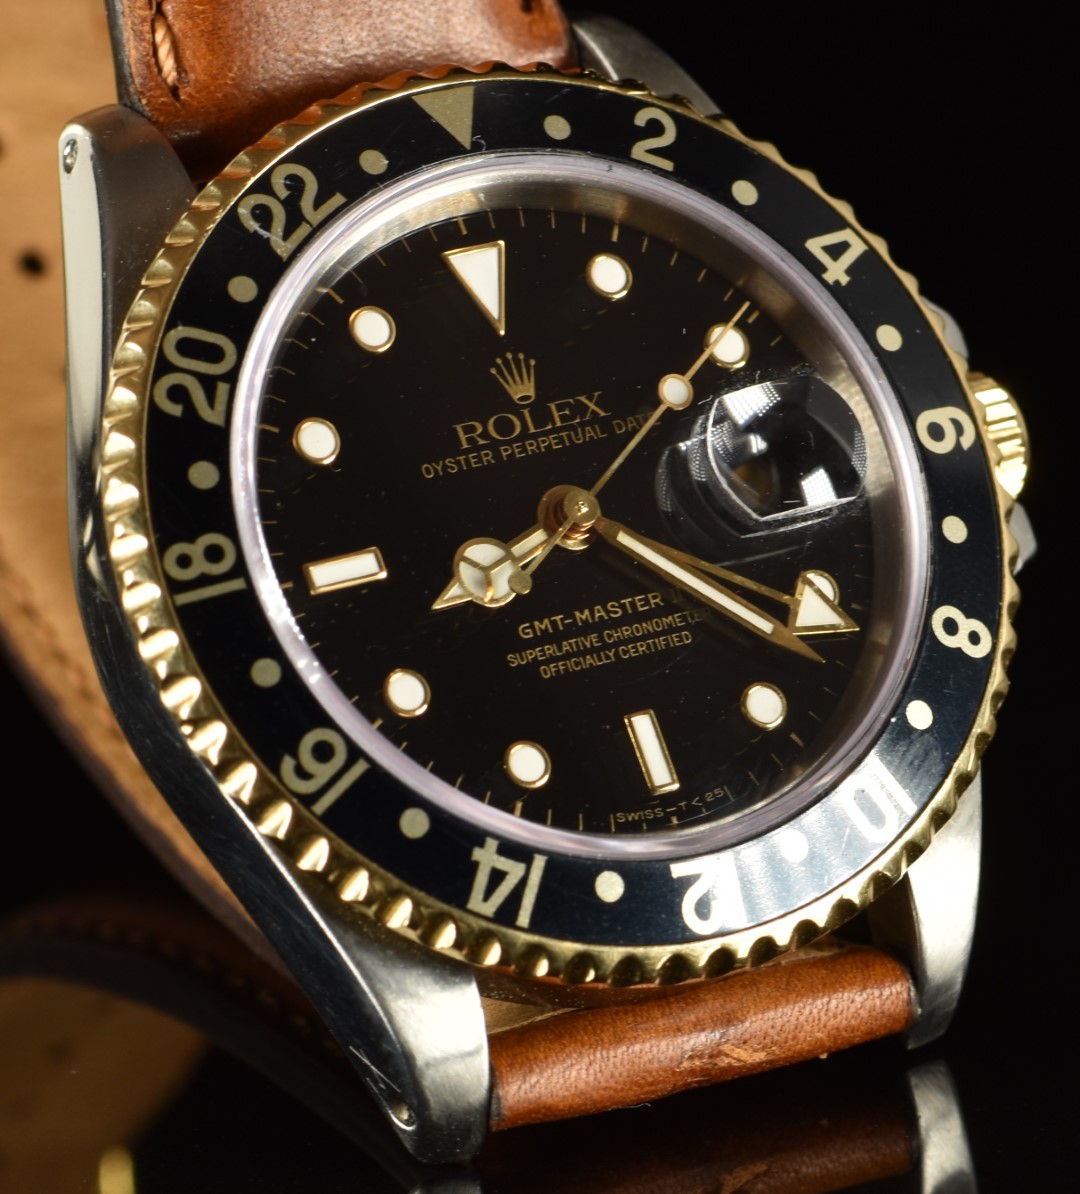 Rolex Oyster Perpetual Date GMT Master II gentleman's automatic wristwatch ref. 16713 with date - Image 3 of 7